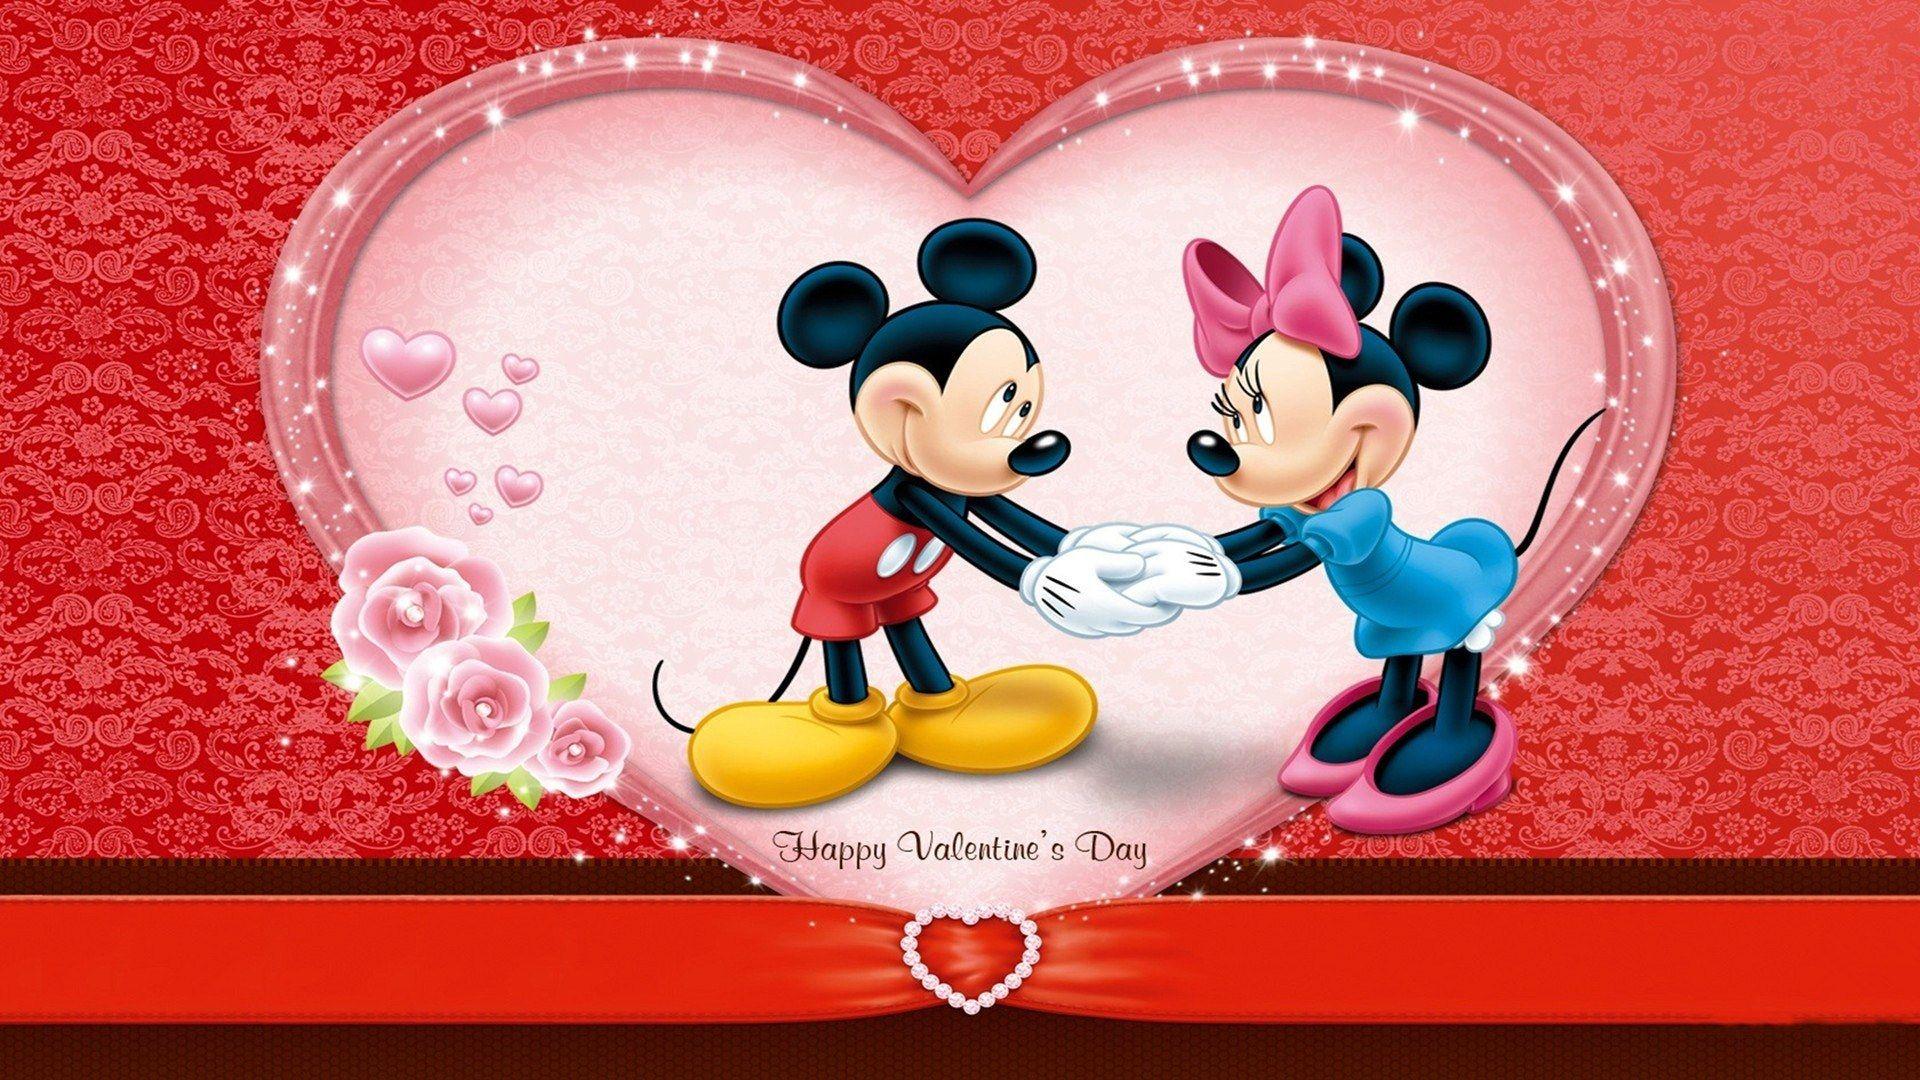 Best Wishes For Valentine's Day Kids Crafts. Best Valentines Day Wishes Wallpaper. Mickey mouse wallpaper, Valentines wallpaper, Disney valentines